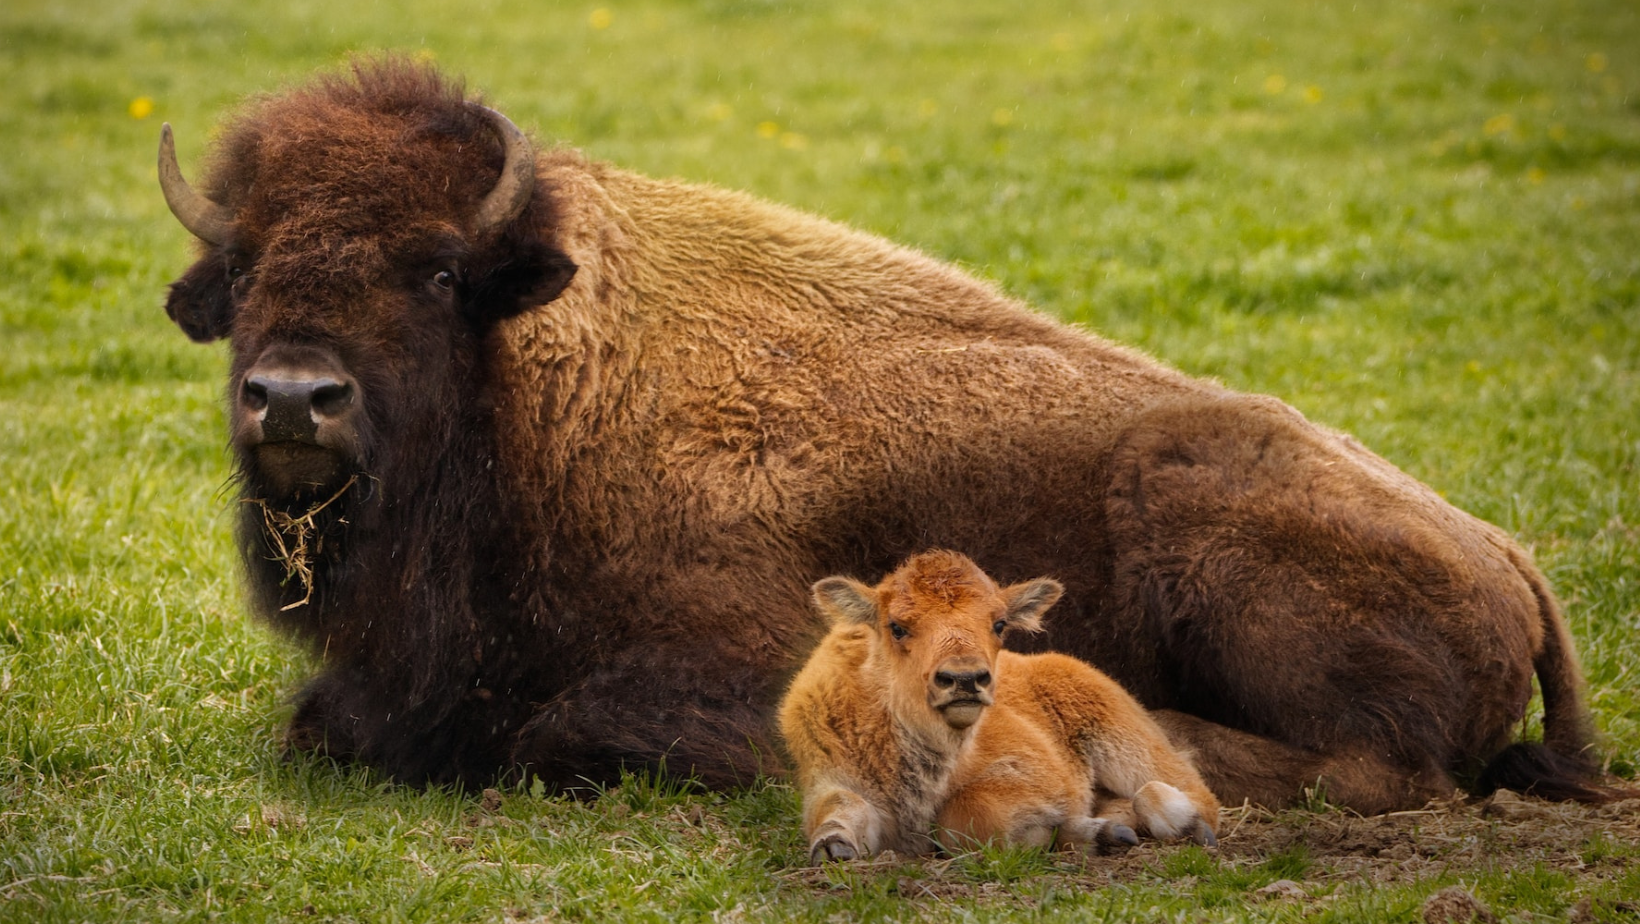 An adult and baby bison lie on a green field.